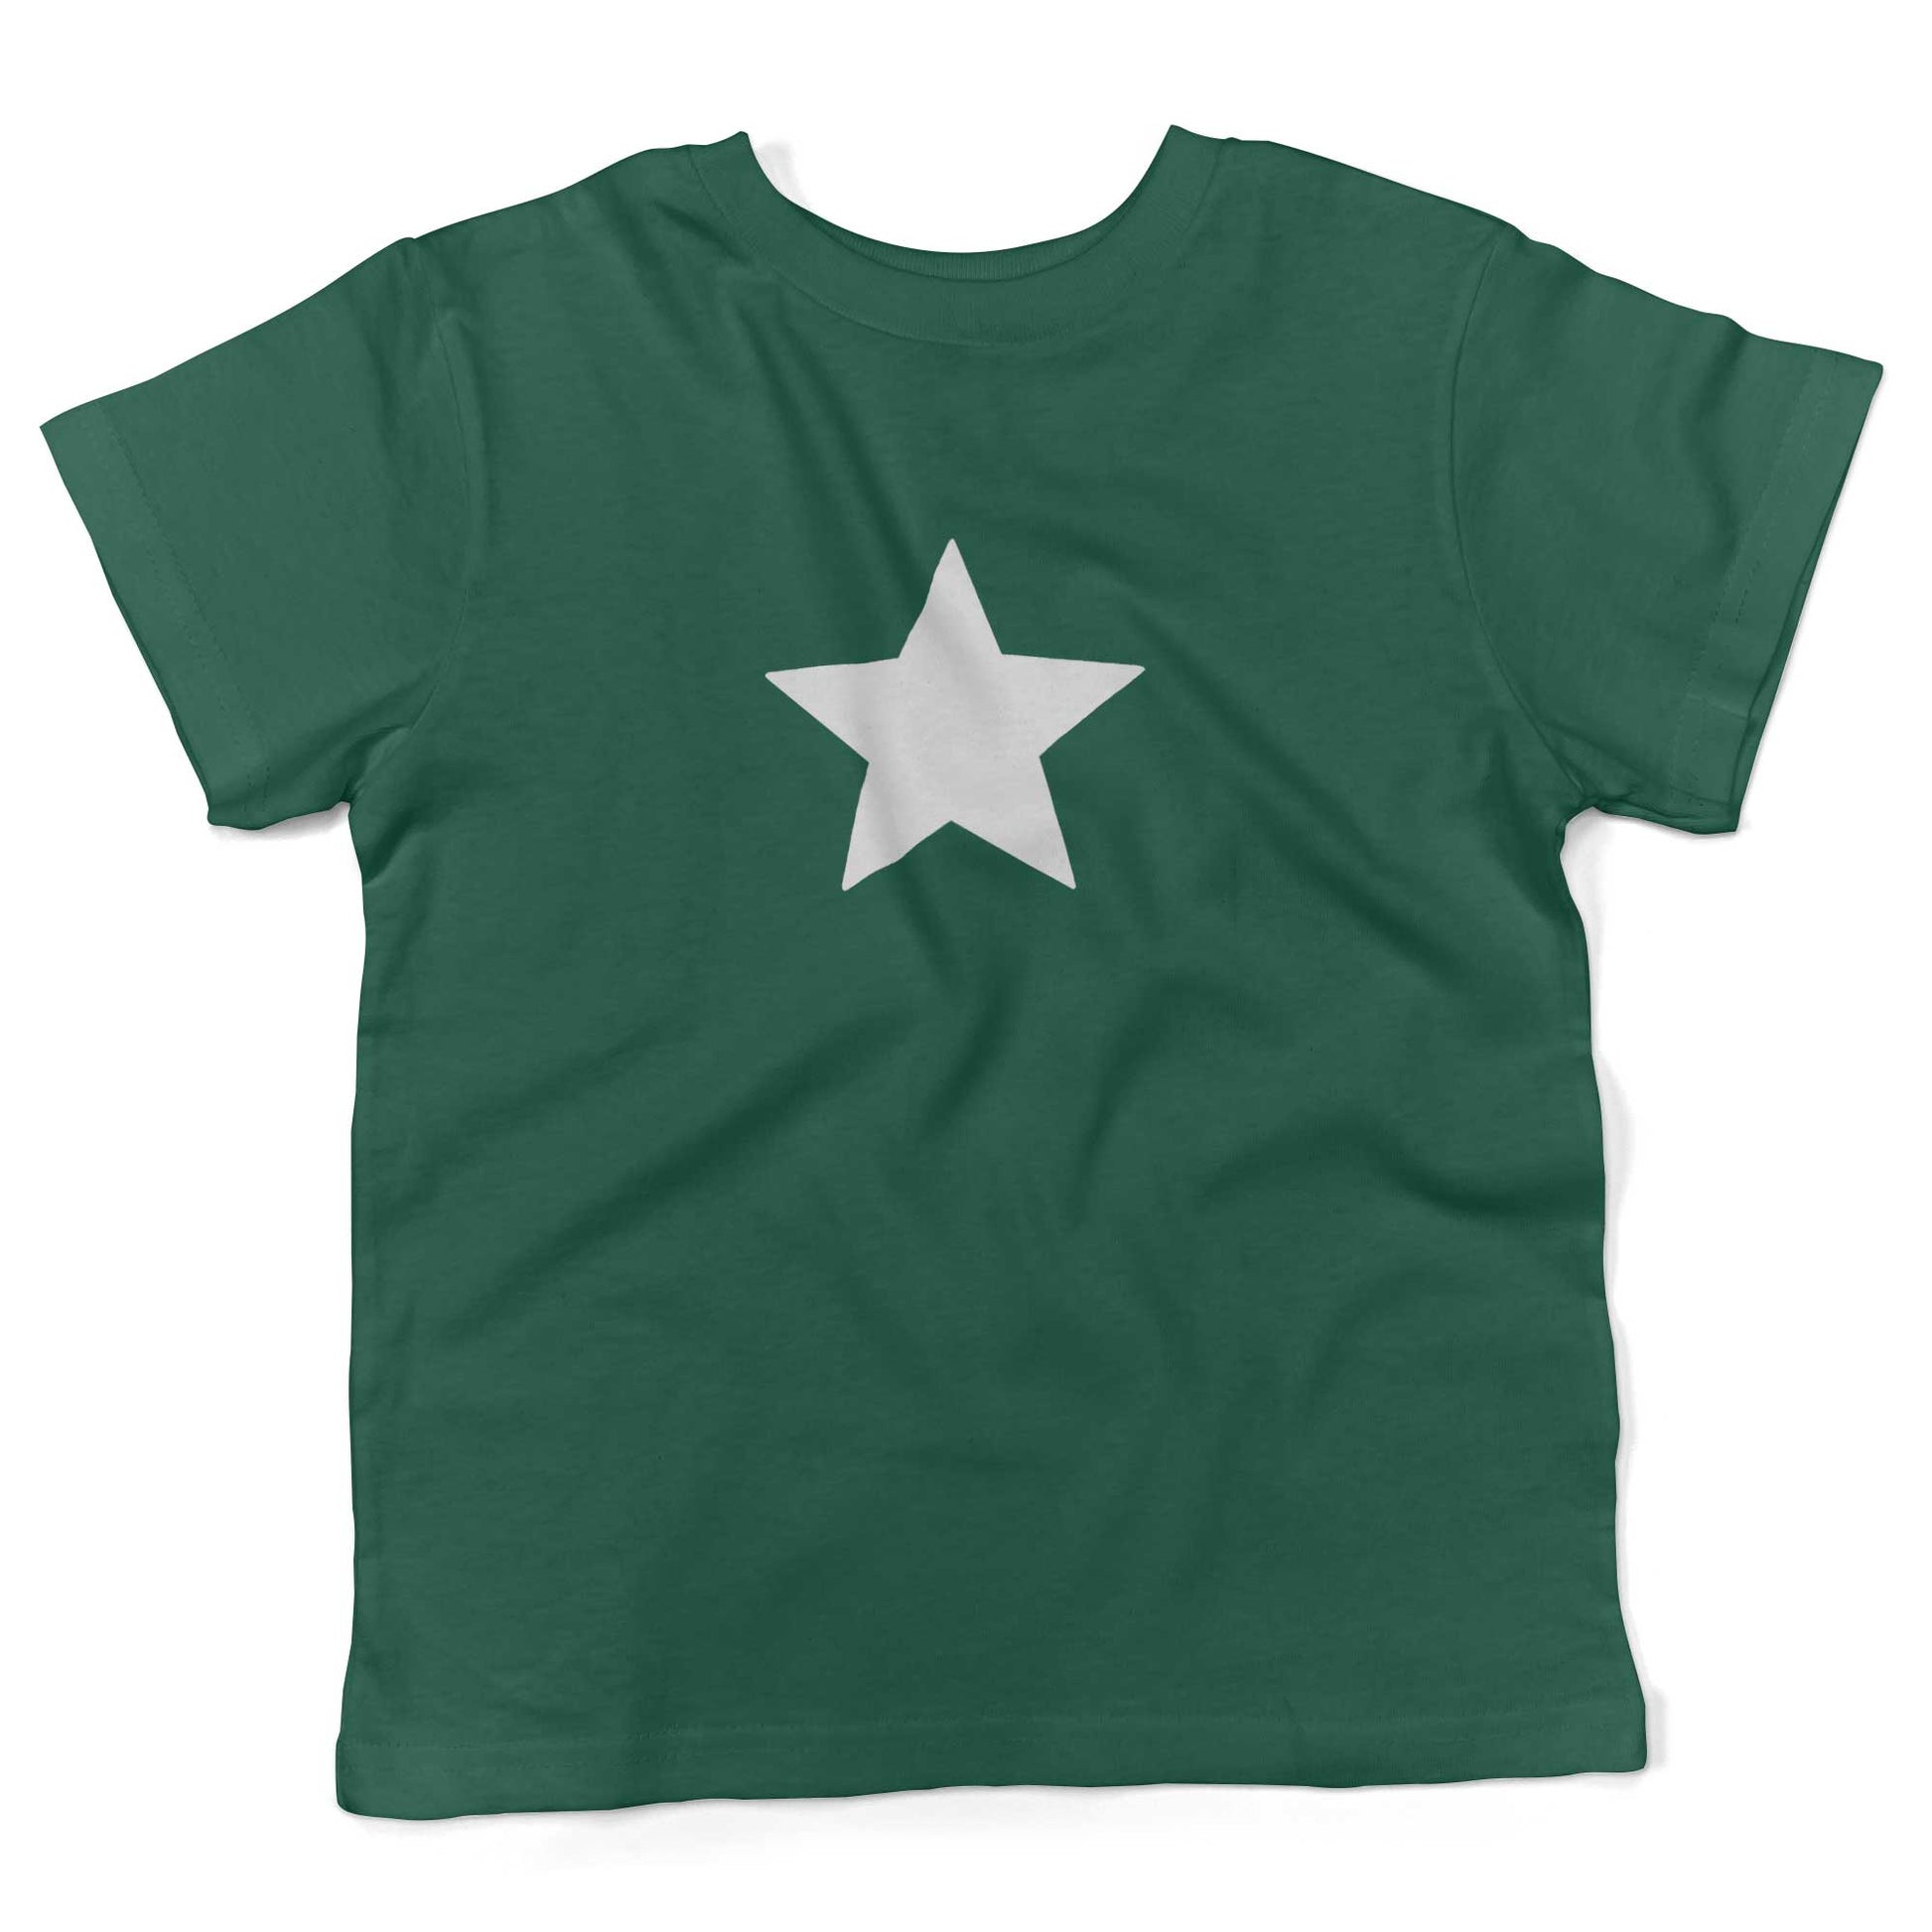 Five-Point Star Toddler Shirt-Kelly Green-White Star